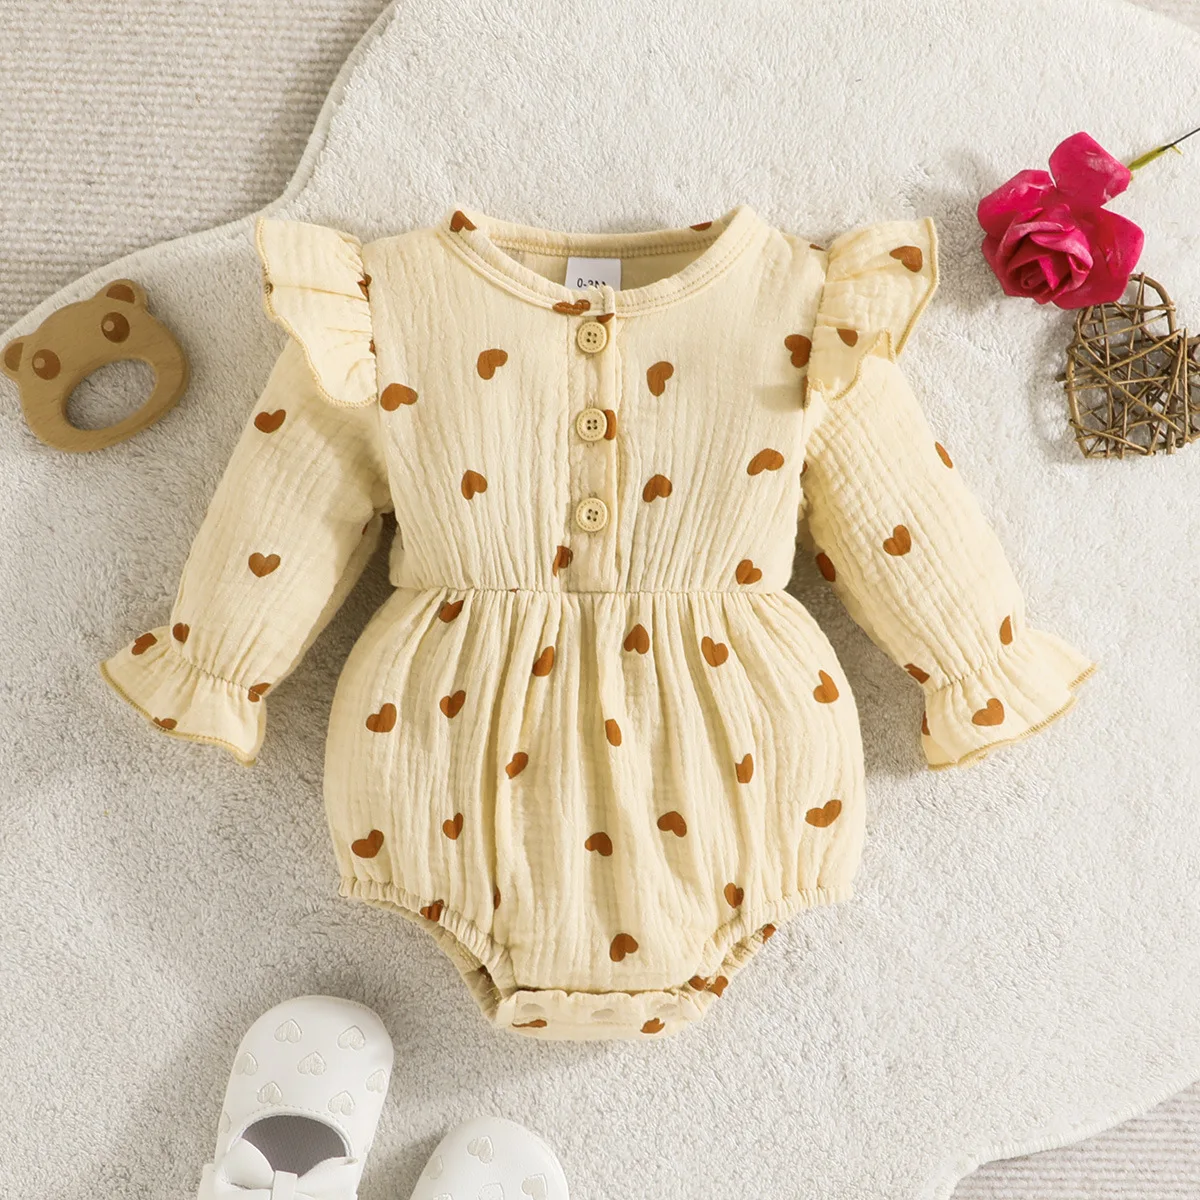 

Newborn Casual Clothing Baby Girls Long Sleeve Round Neck Heart Print Romper Toddler Bodysuits For 3-18 Month